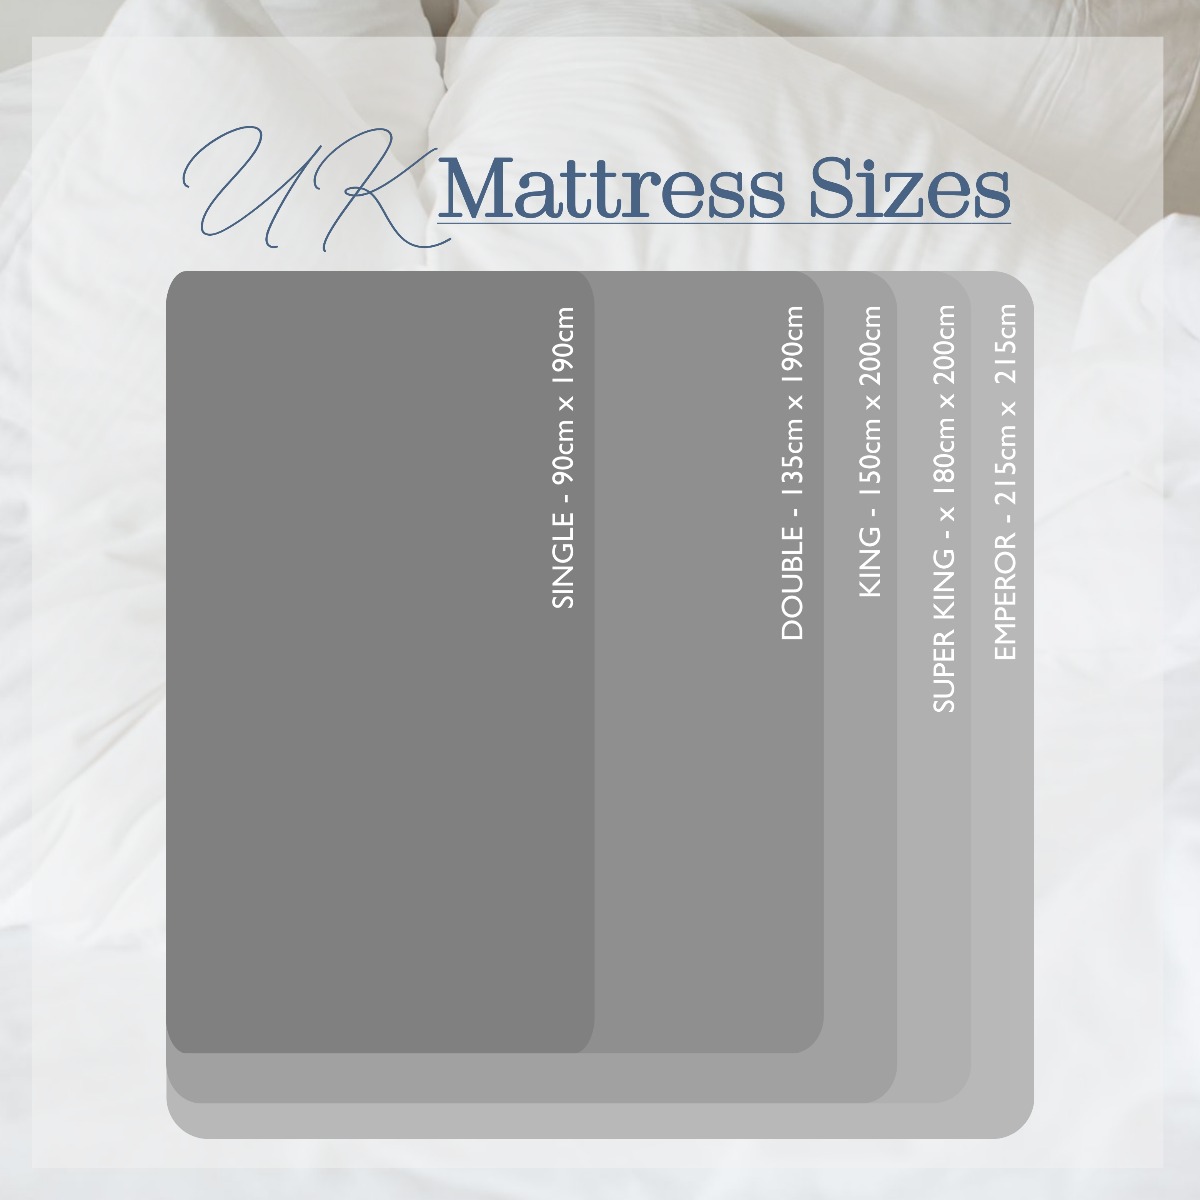 Your Guide To Uk Mattress Sizes The, What Is Bigger Than A Super King Size Bed